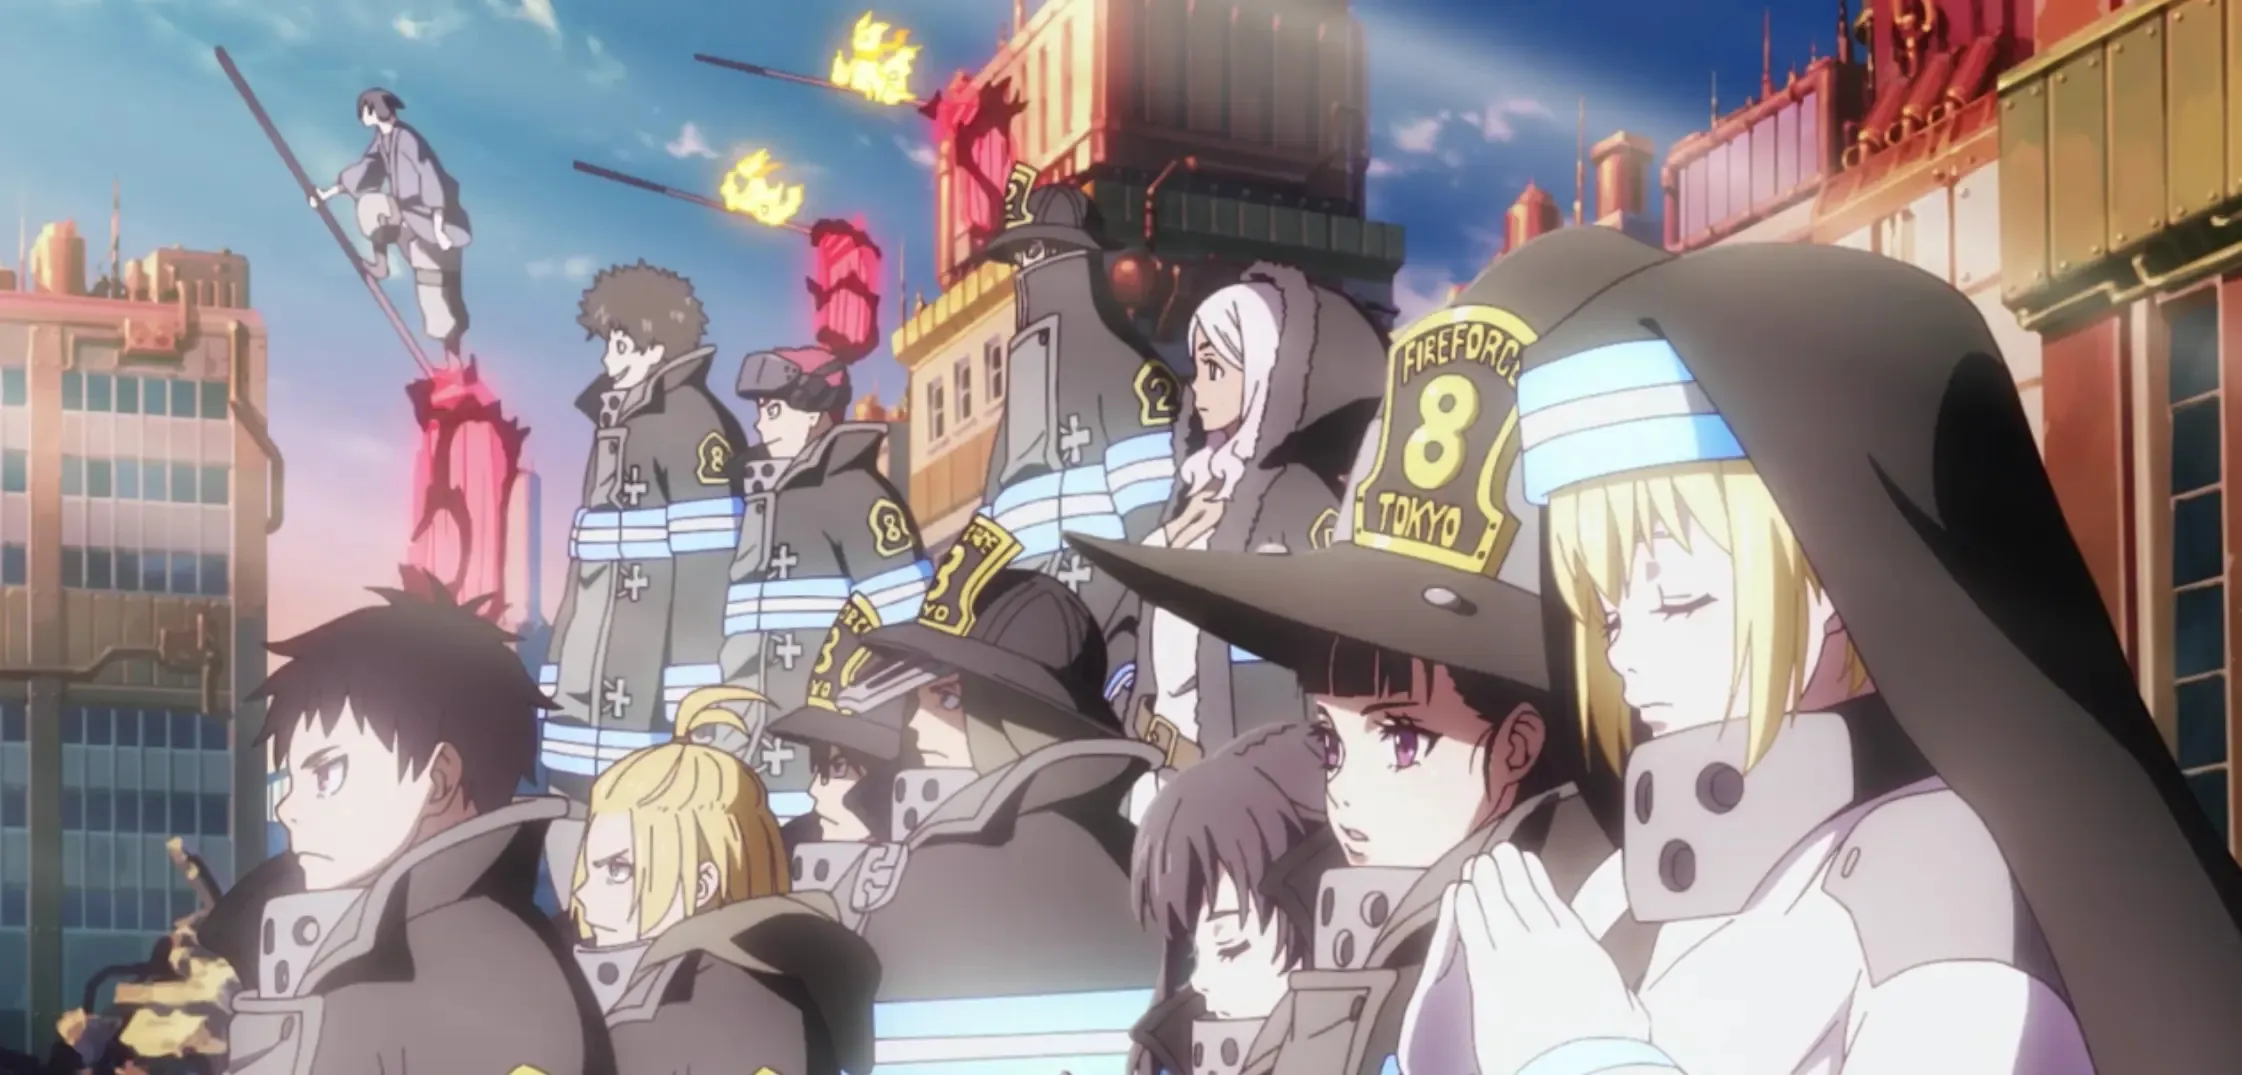 What To Expect In Season 3 Of Fire Force